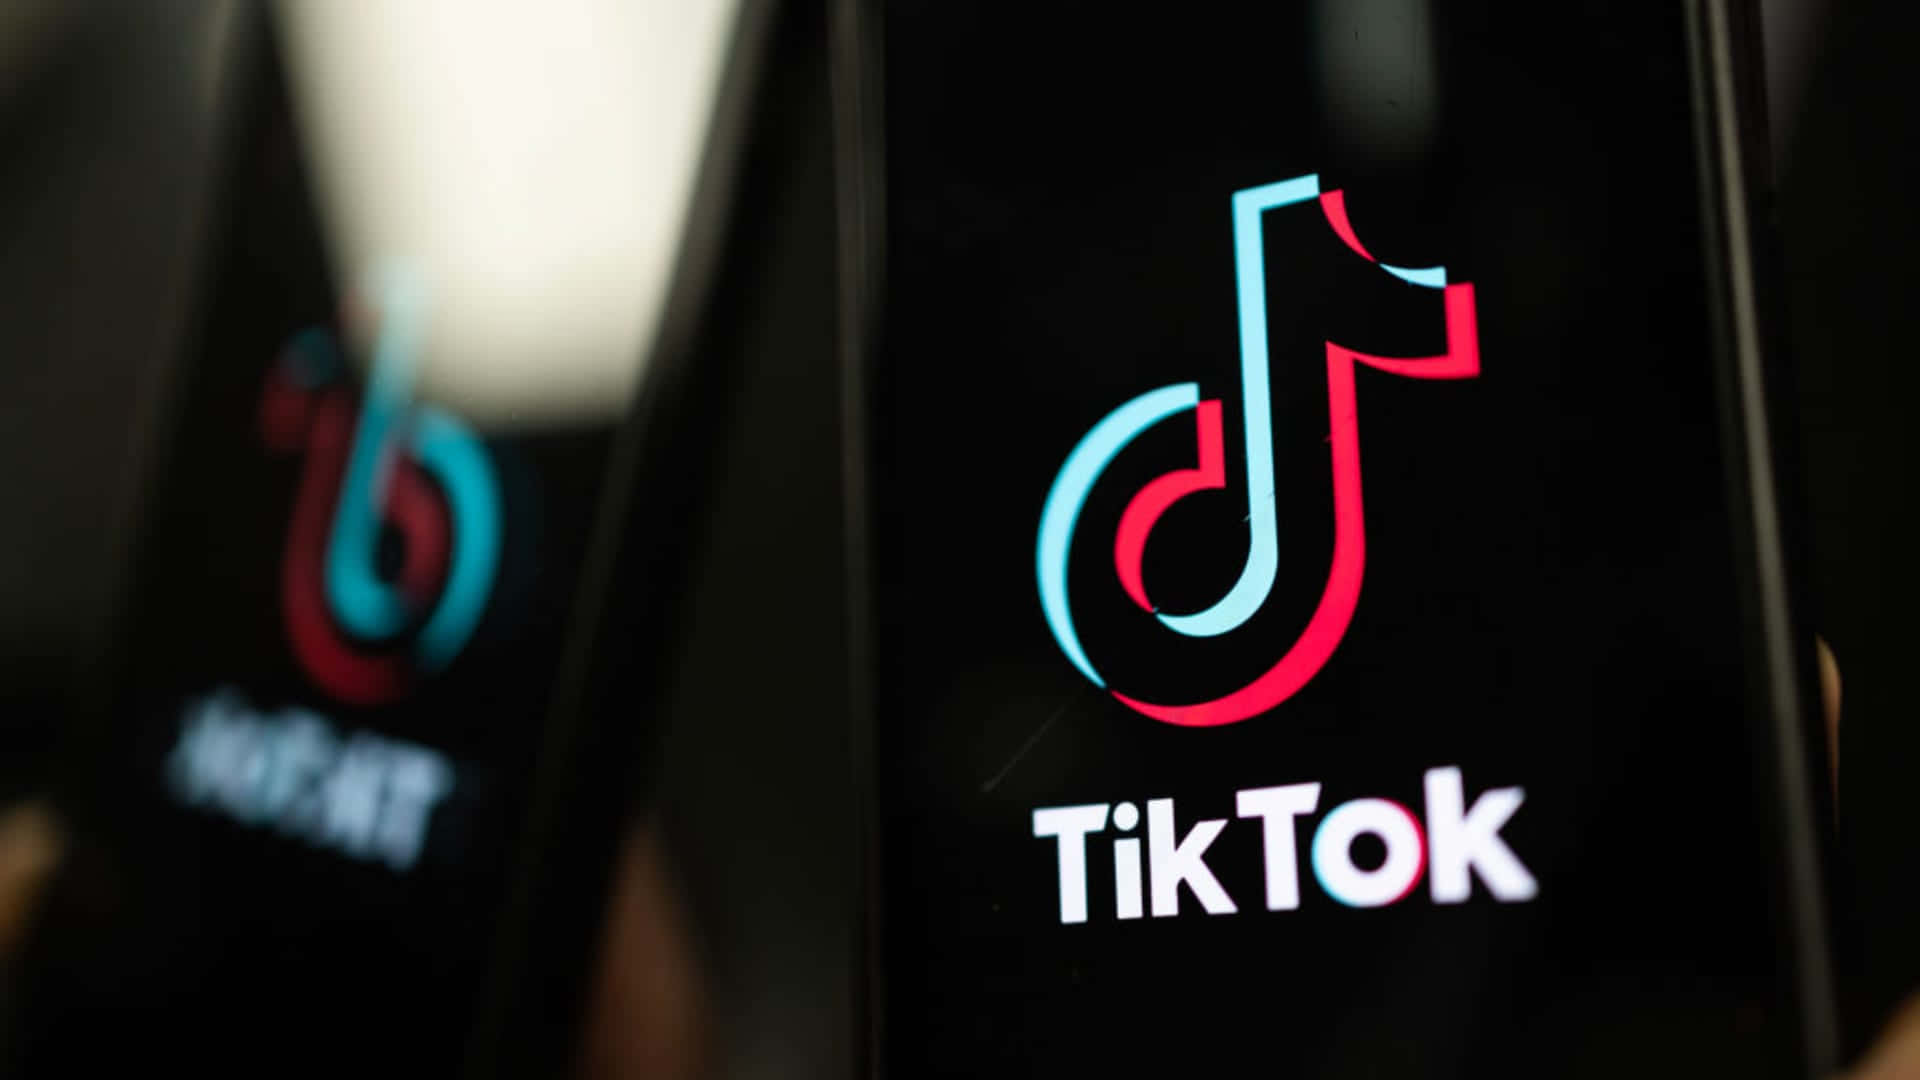 "TikTok has something for everyone, no matter who you are!"